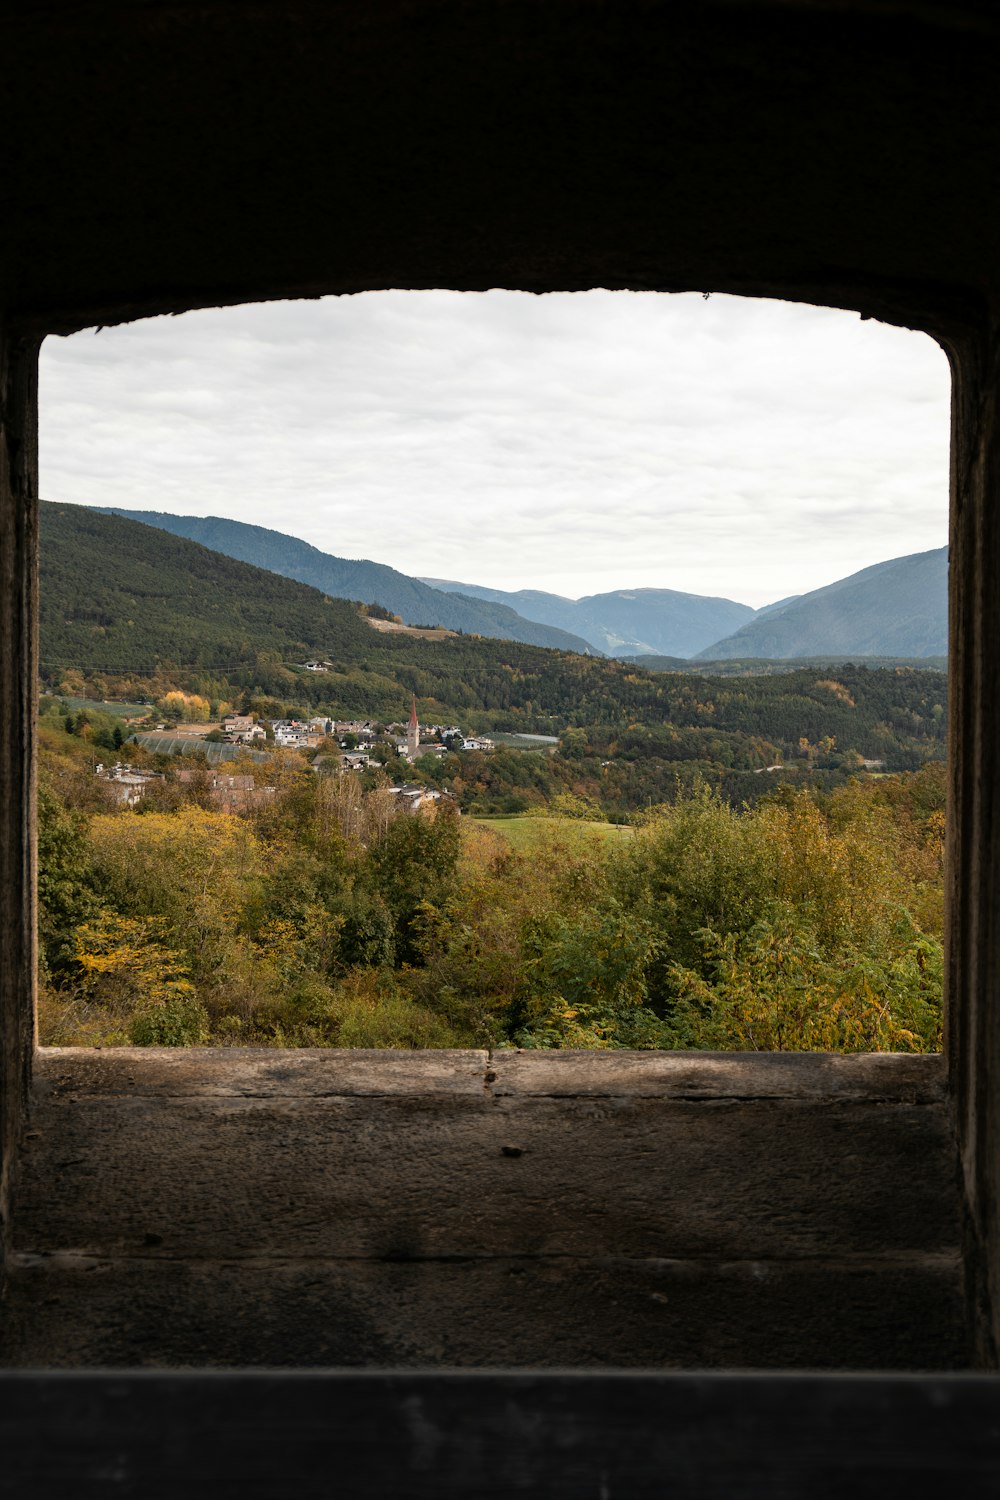 a view of a valley through a window